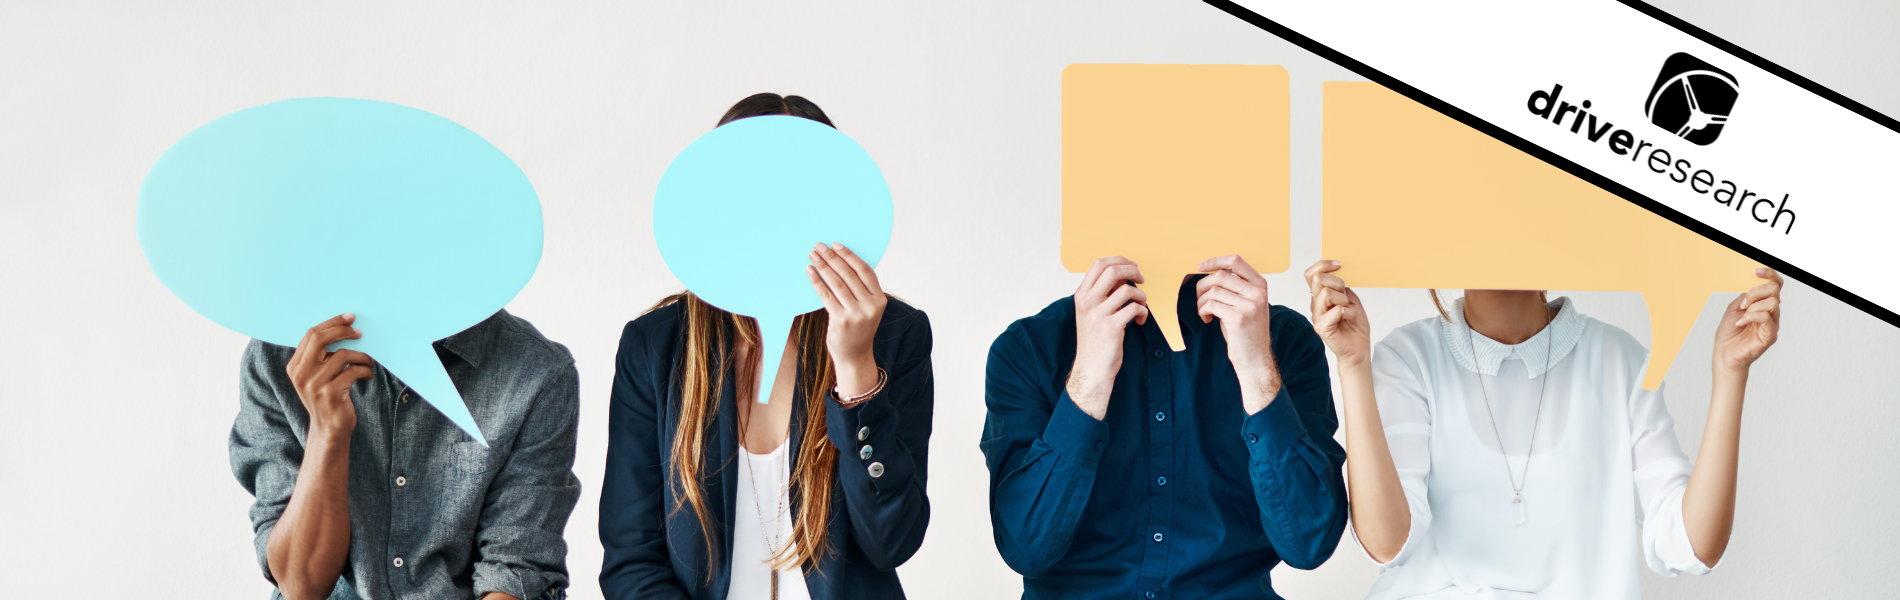 people covering faces with thought bubbles - opinions concept